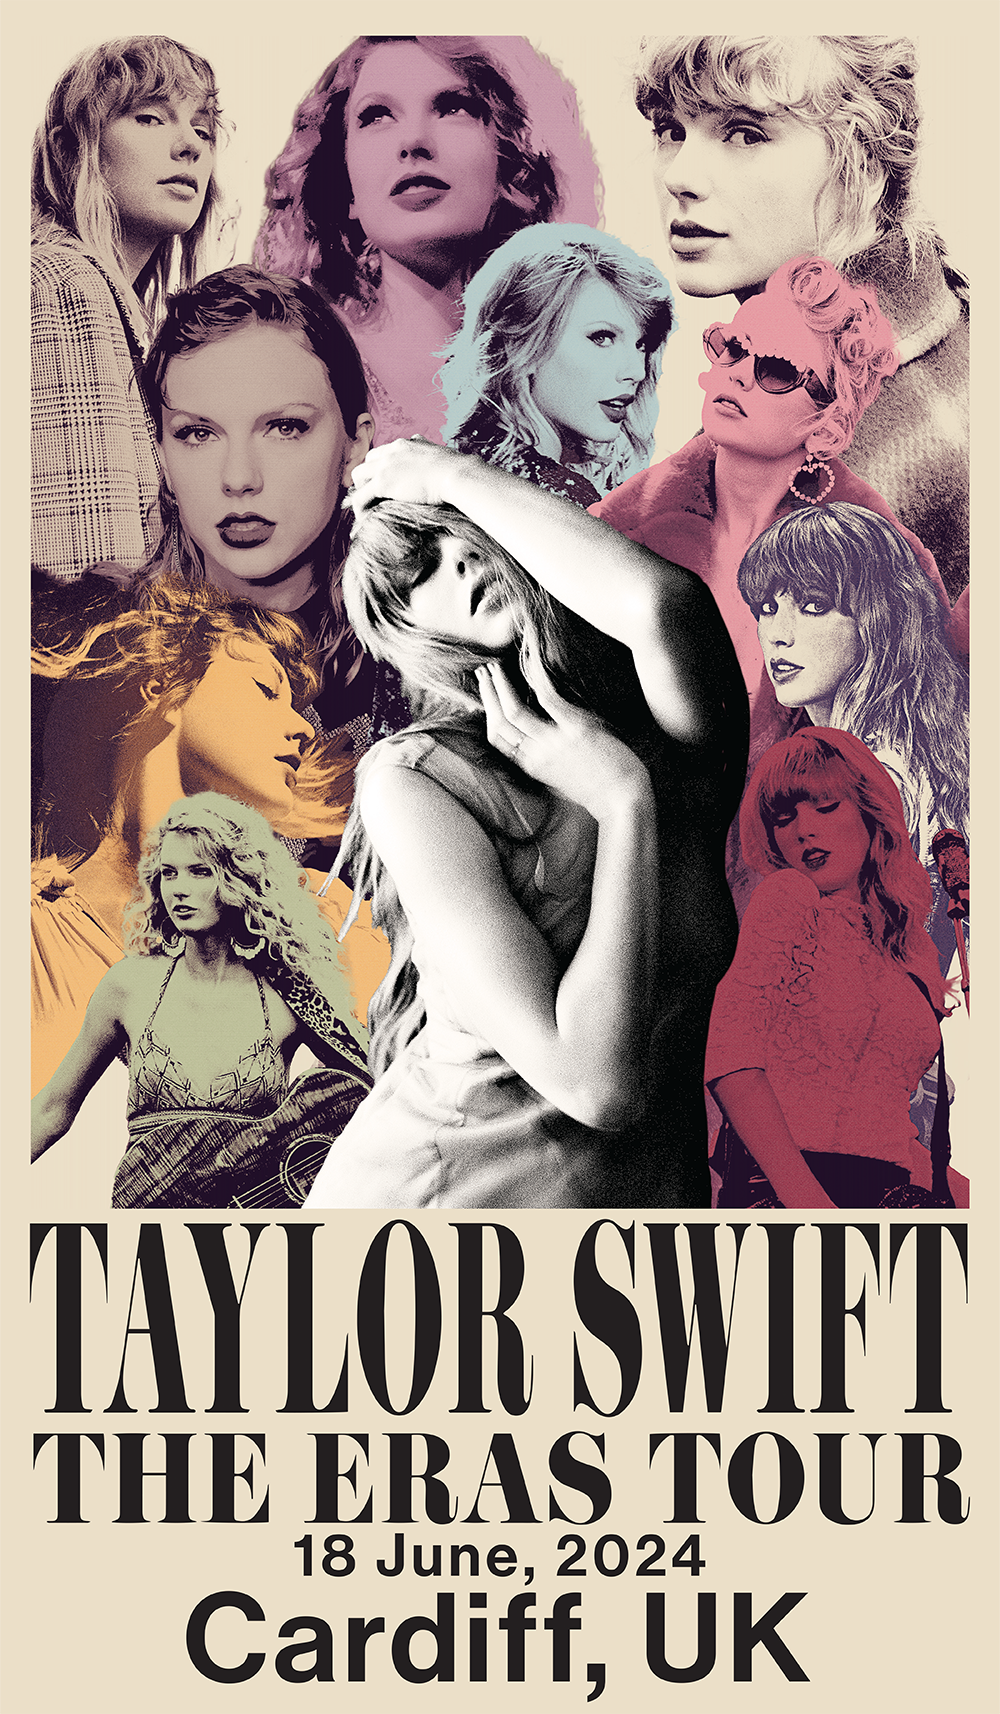 Taylor Swift - Taylor Swift The Eras Tour Cardiff, UK Poster